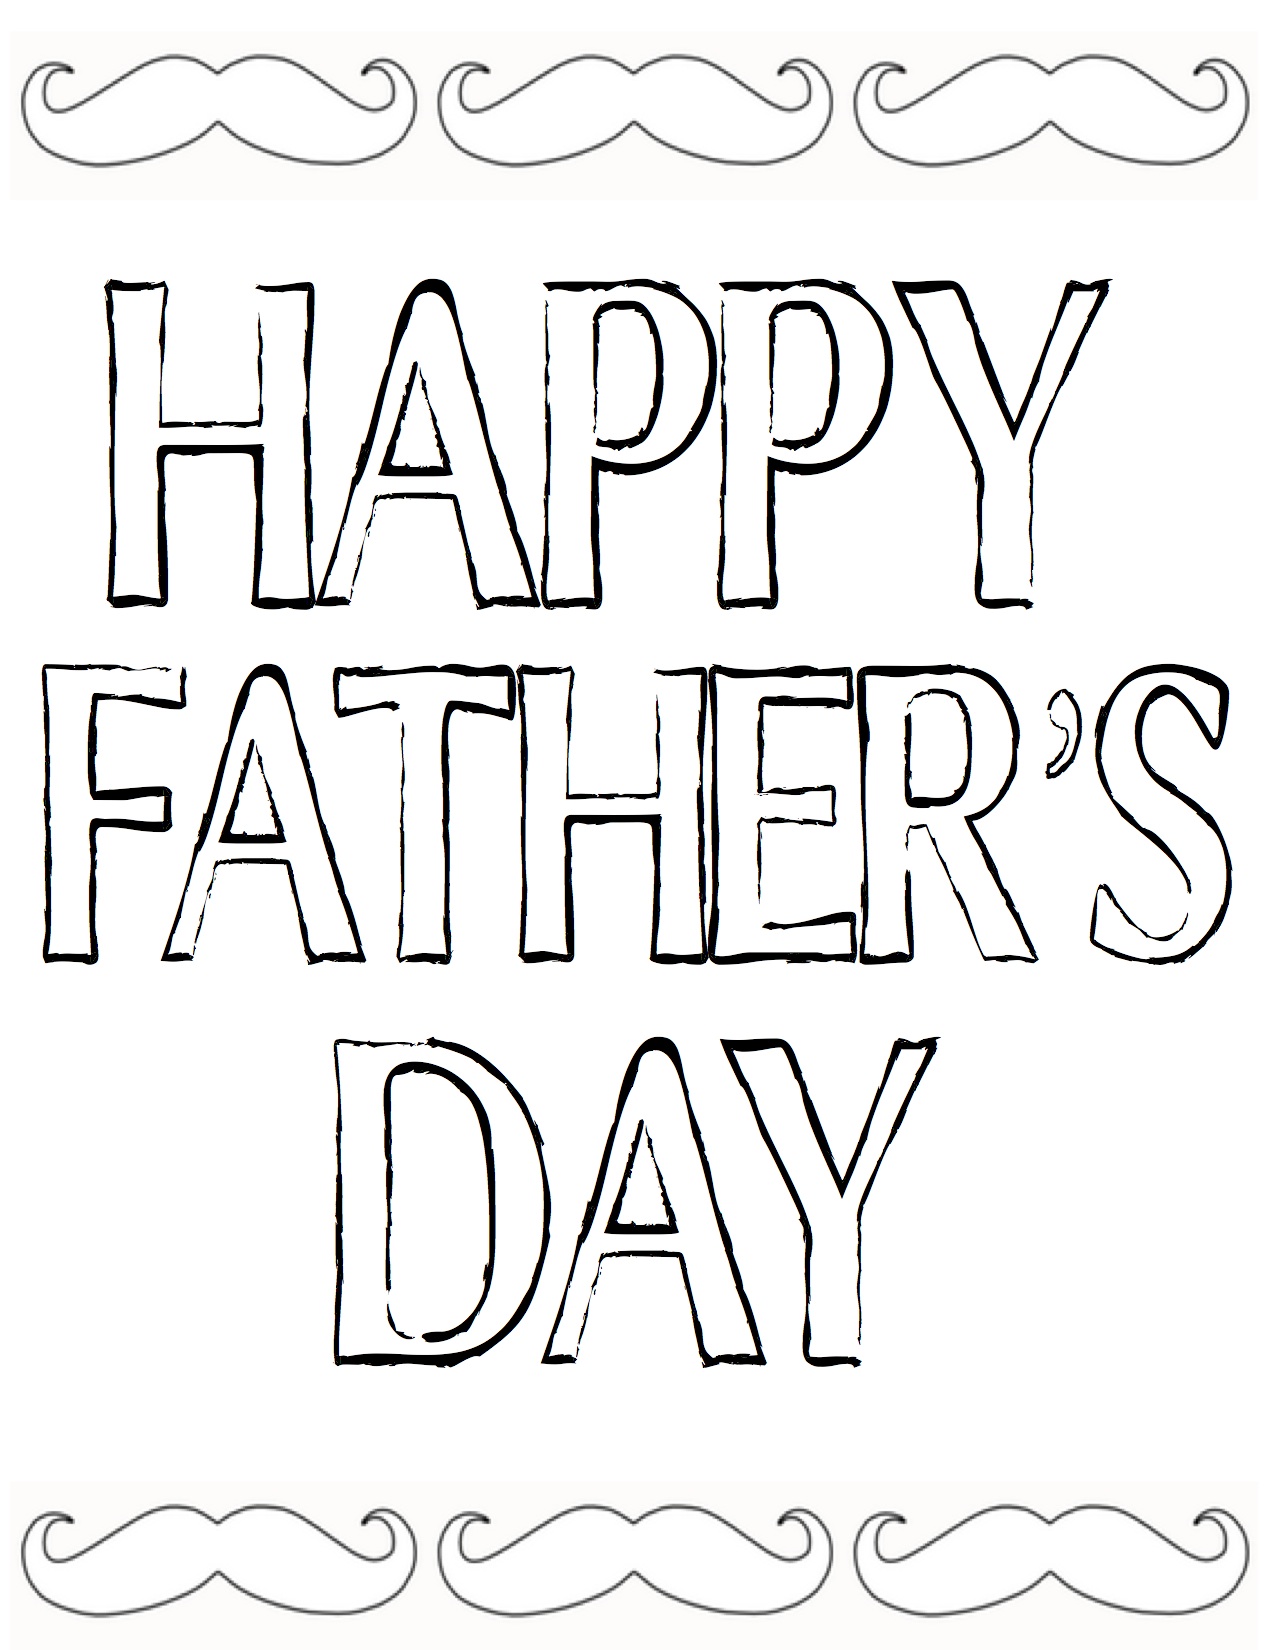 happy-fathers-day-cards-printable-free-free-printable-templates